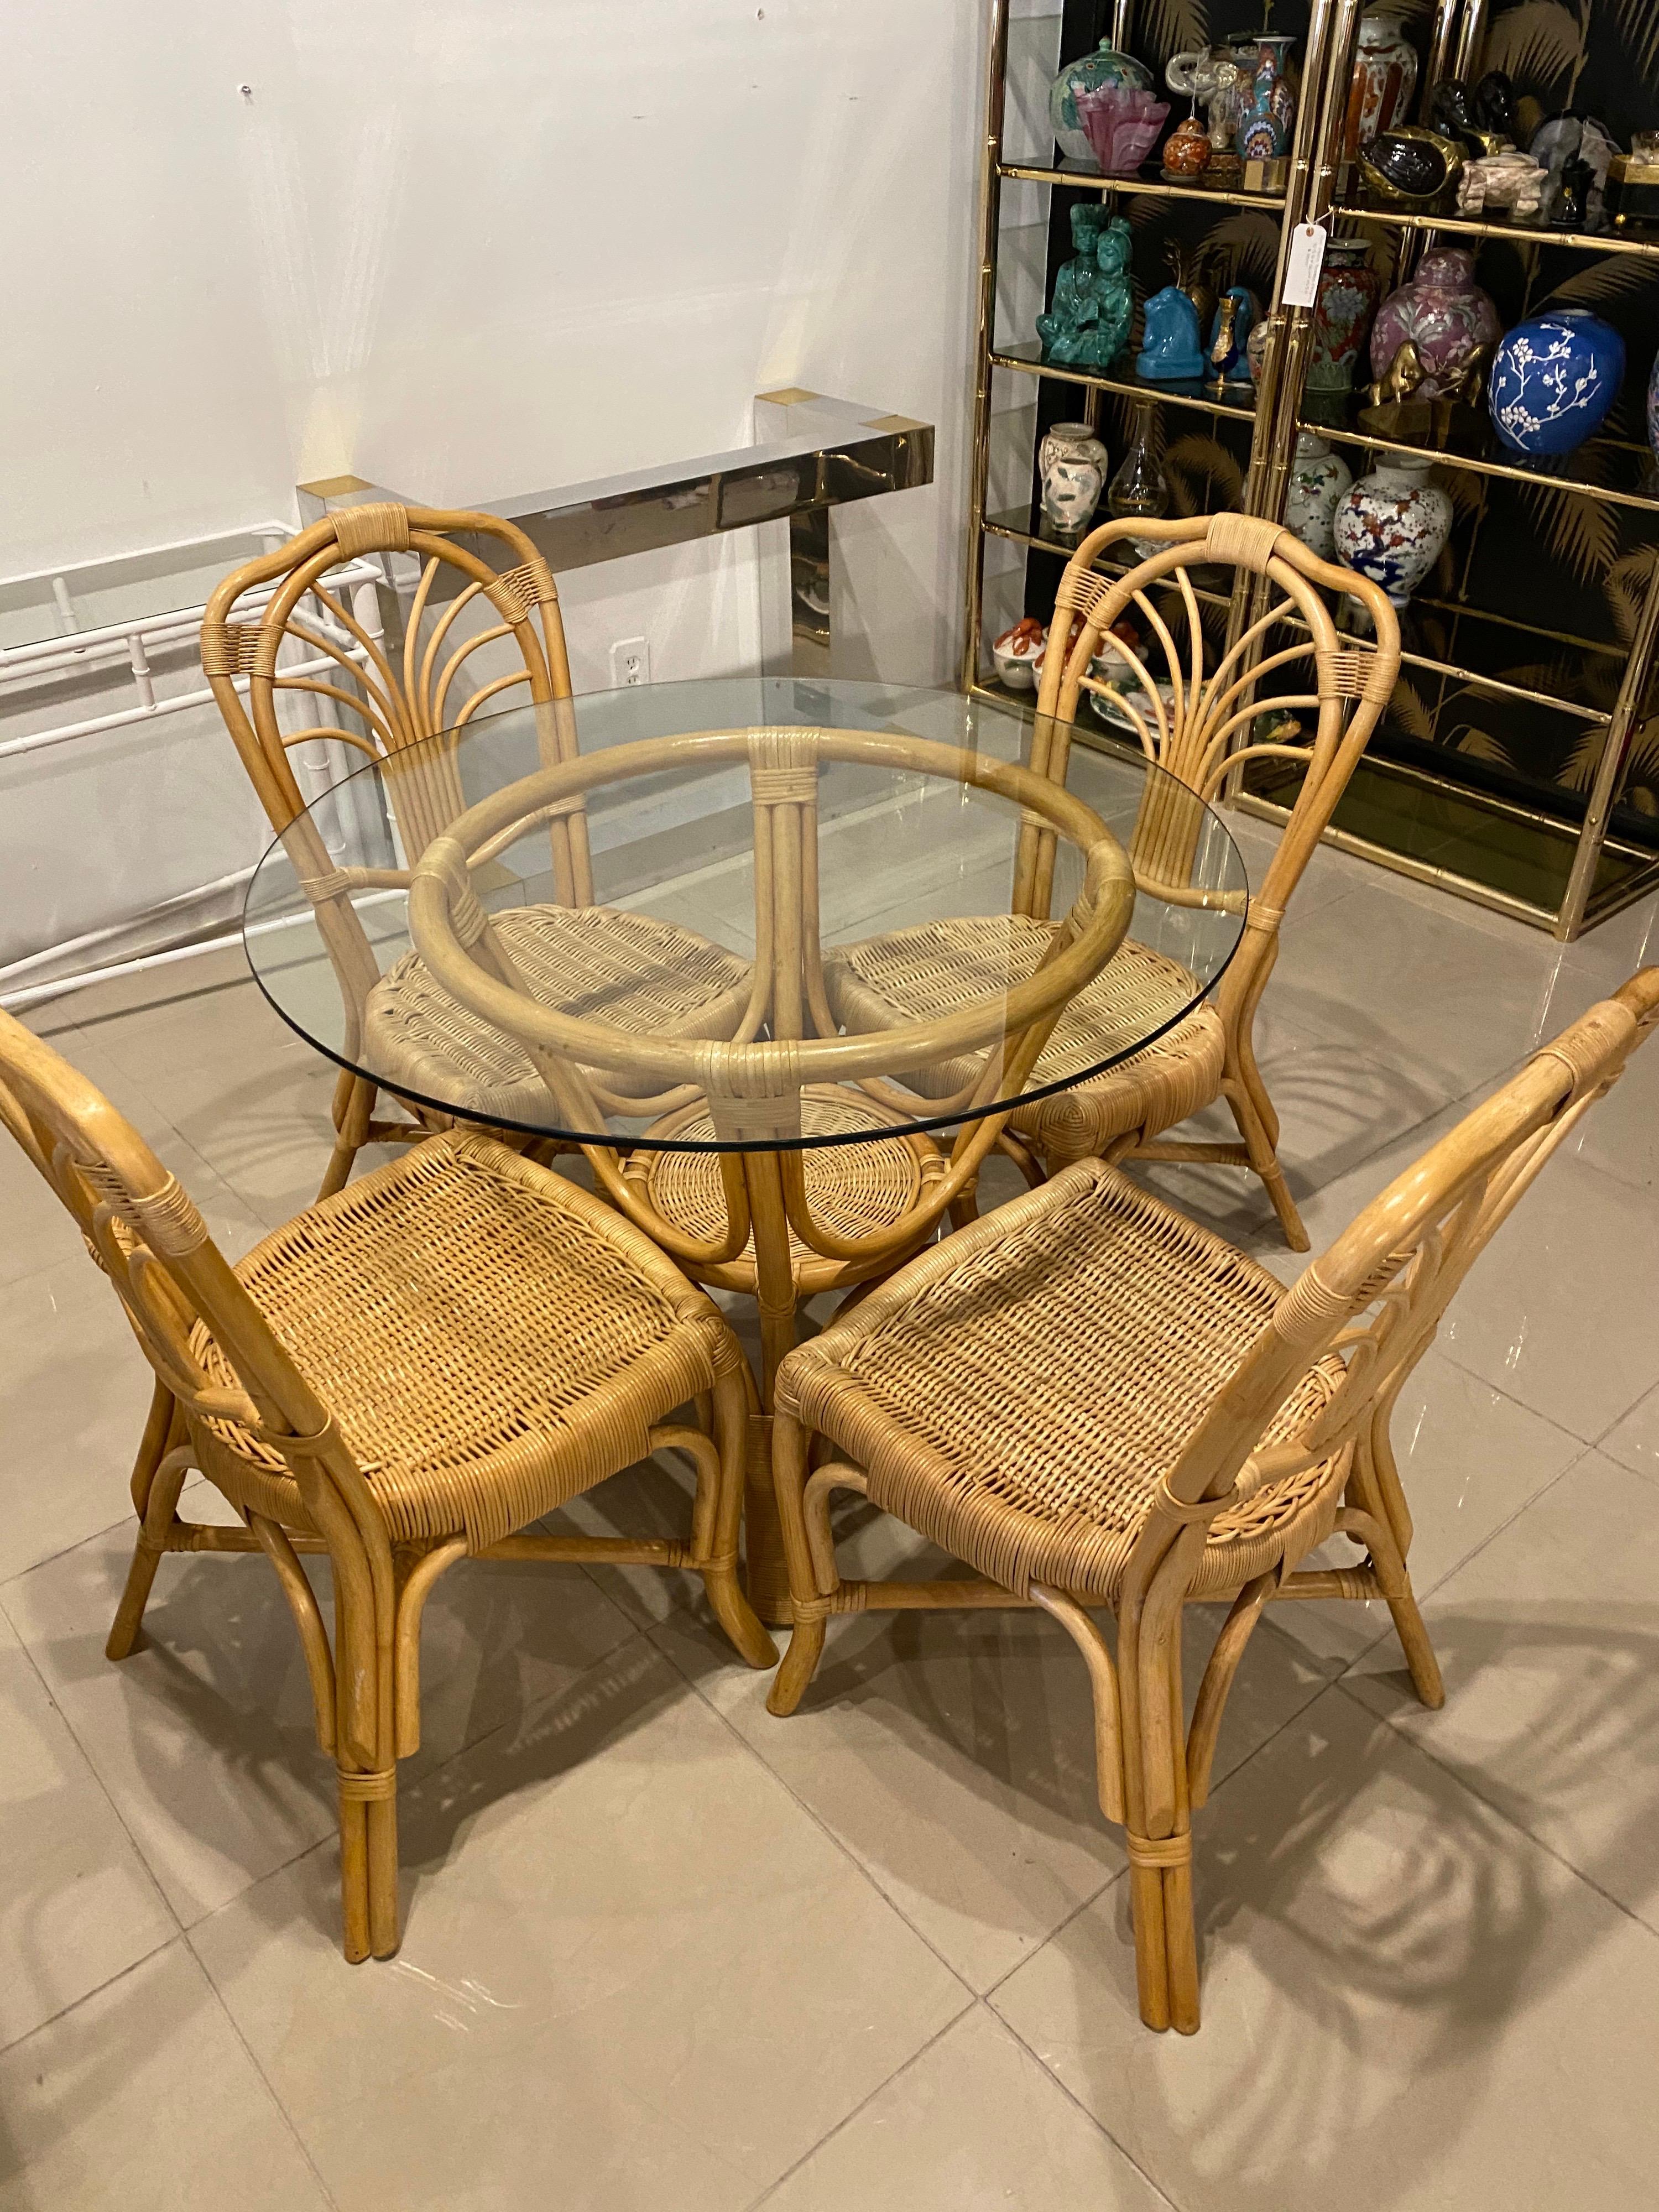 Vintage 5 piece rattan and wicker dining set. Includes 4 chairs and table base. Glass pictured is not included as it is used.
Table base measures 26 D x 30 H. Chair sizes are below.
Seat depth is 16